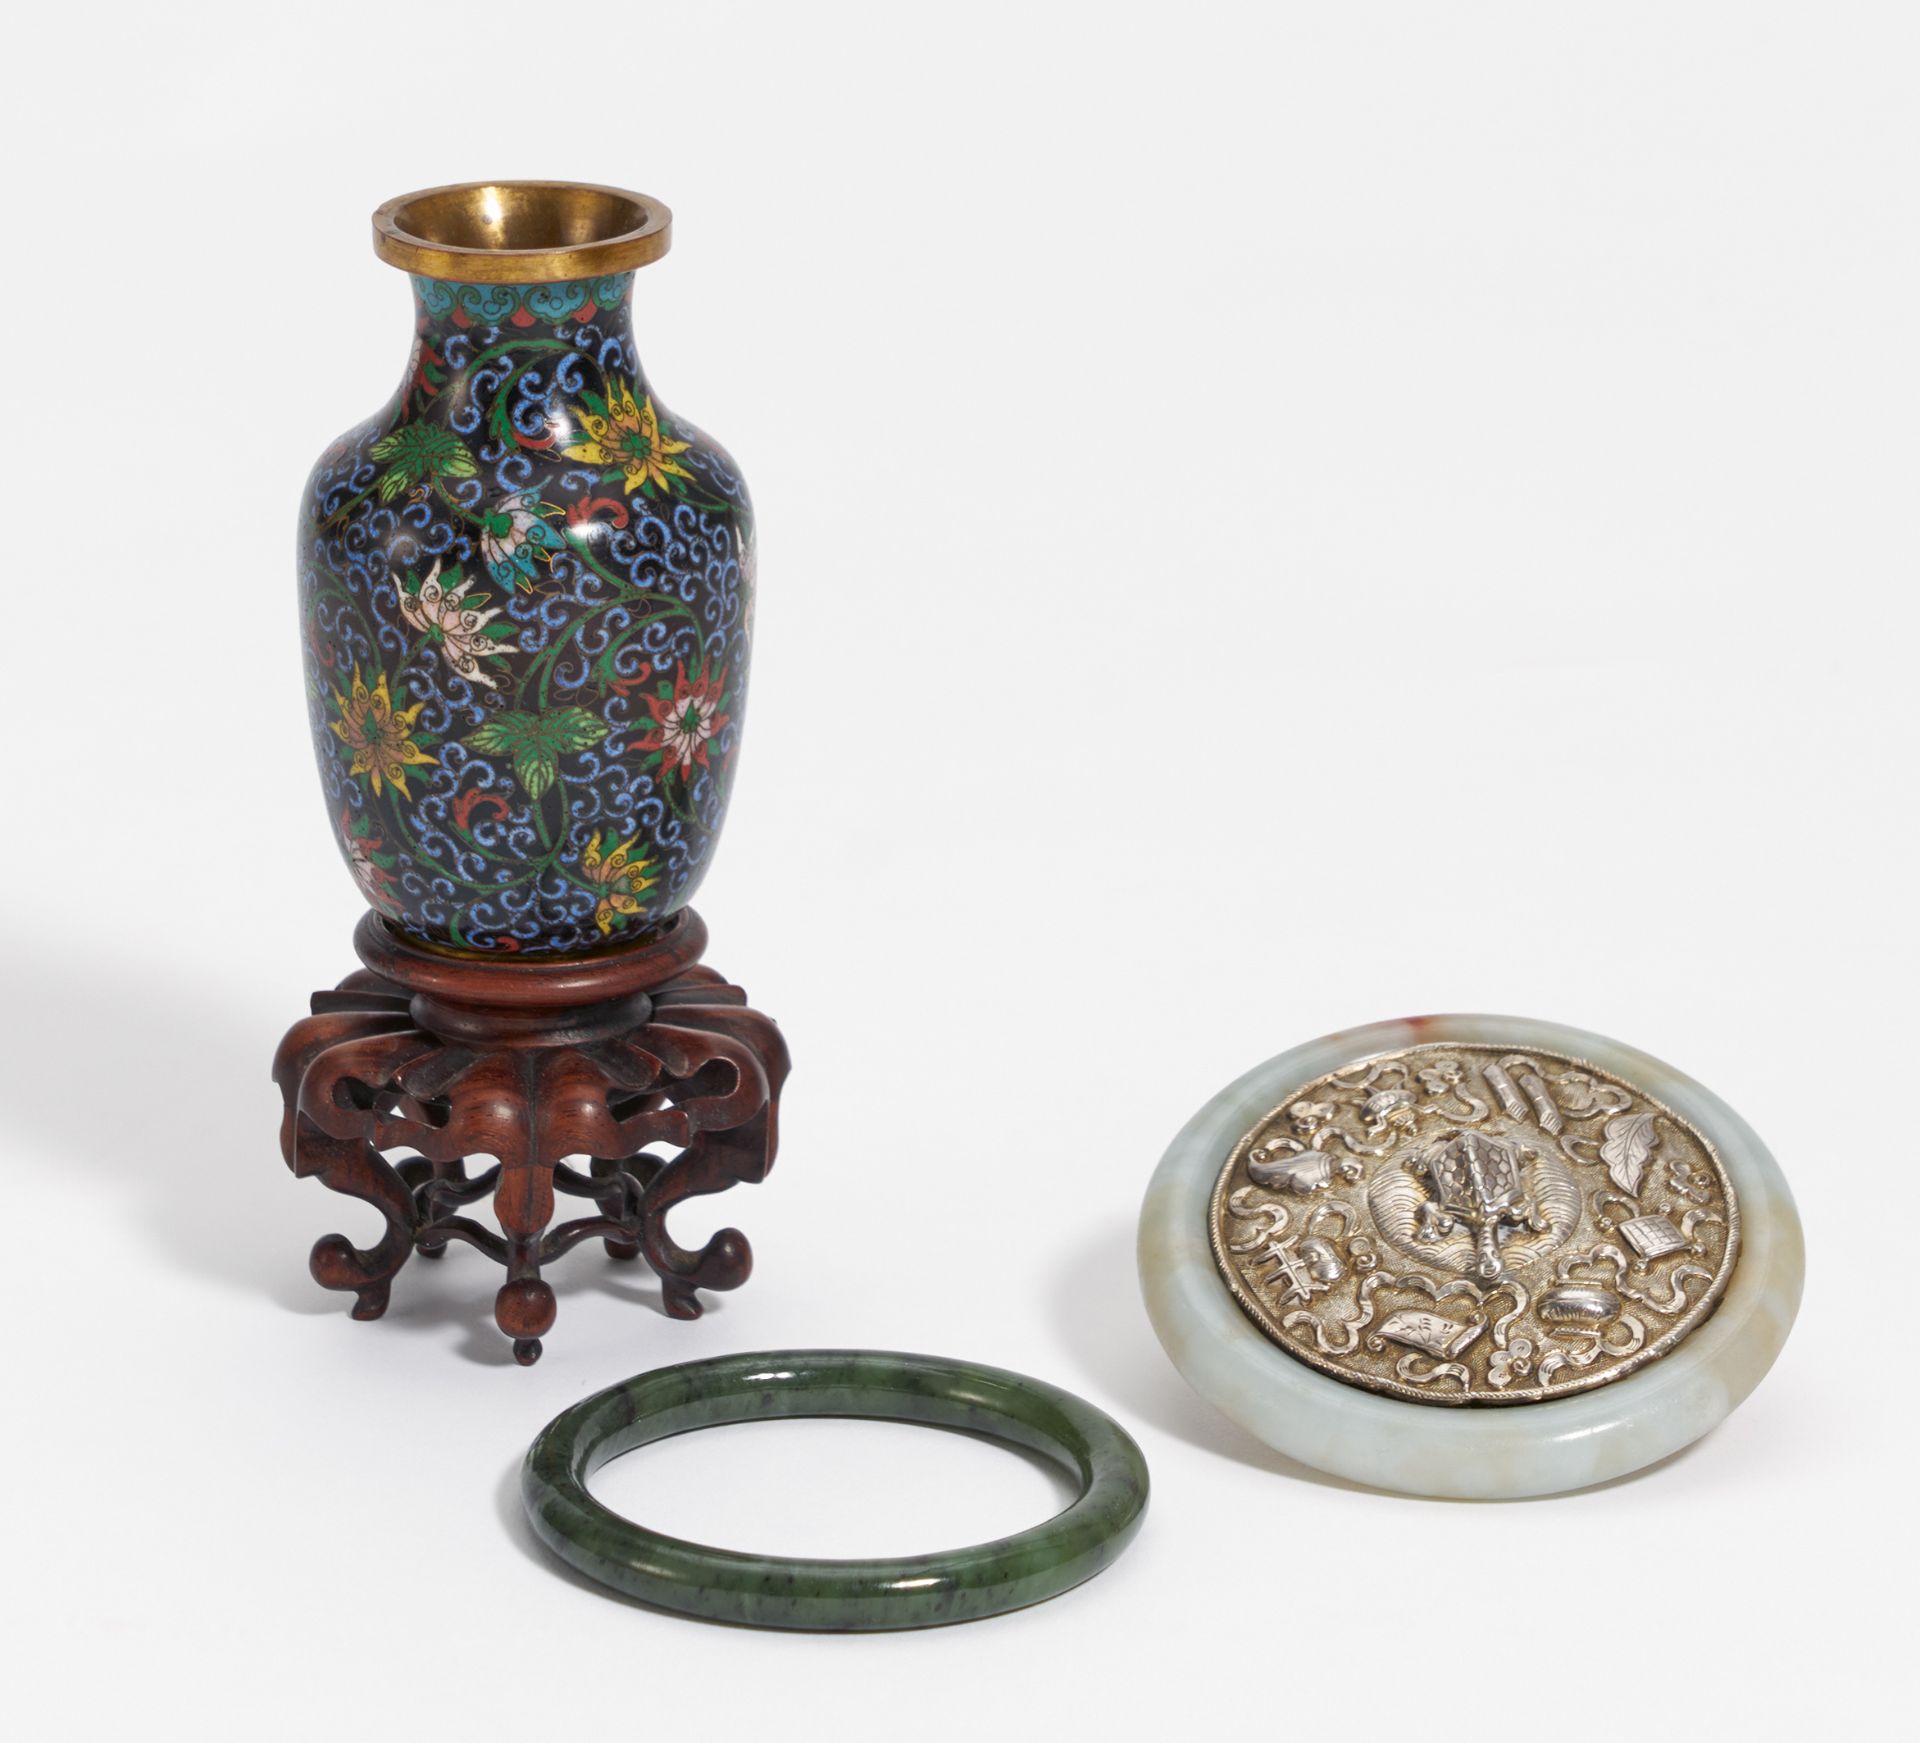 SMALL MIRROR, JADE ARM SPANGLE AND CLOISONNÉ VASE. China. 19th-20th c. a) Mirror with silver back